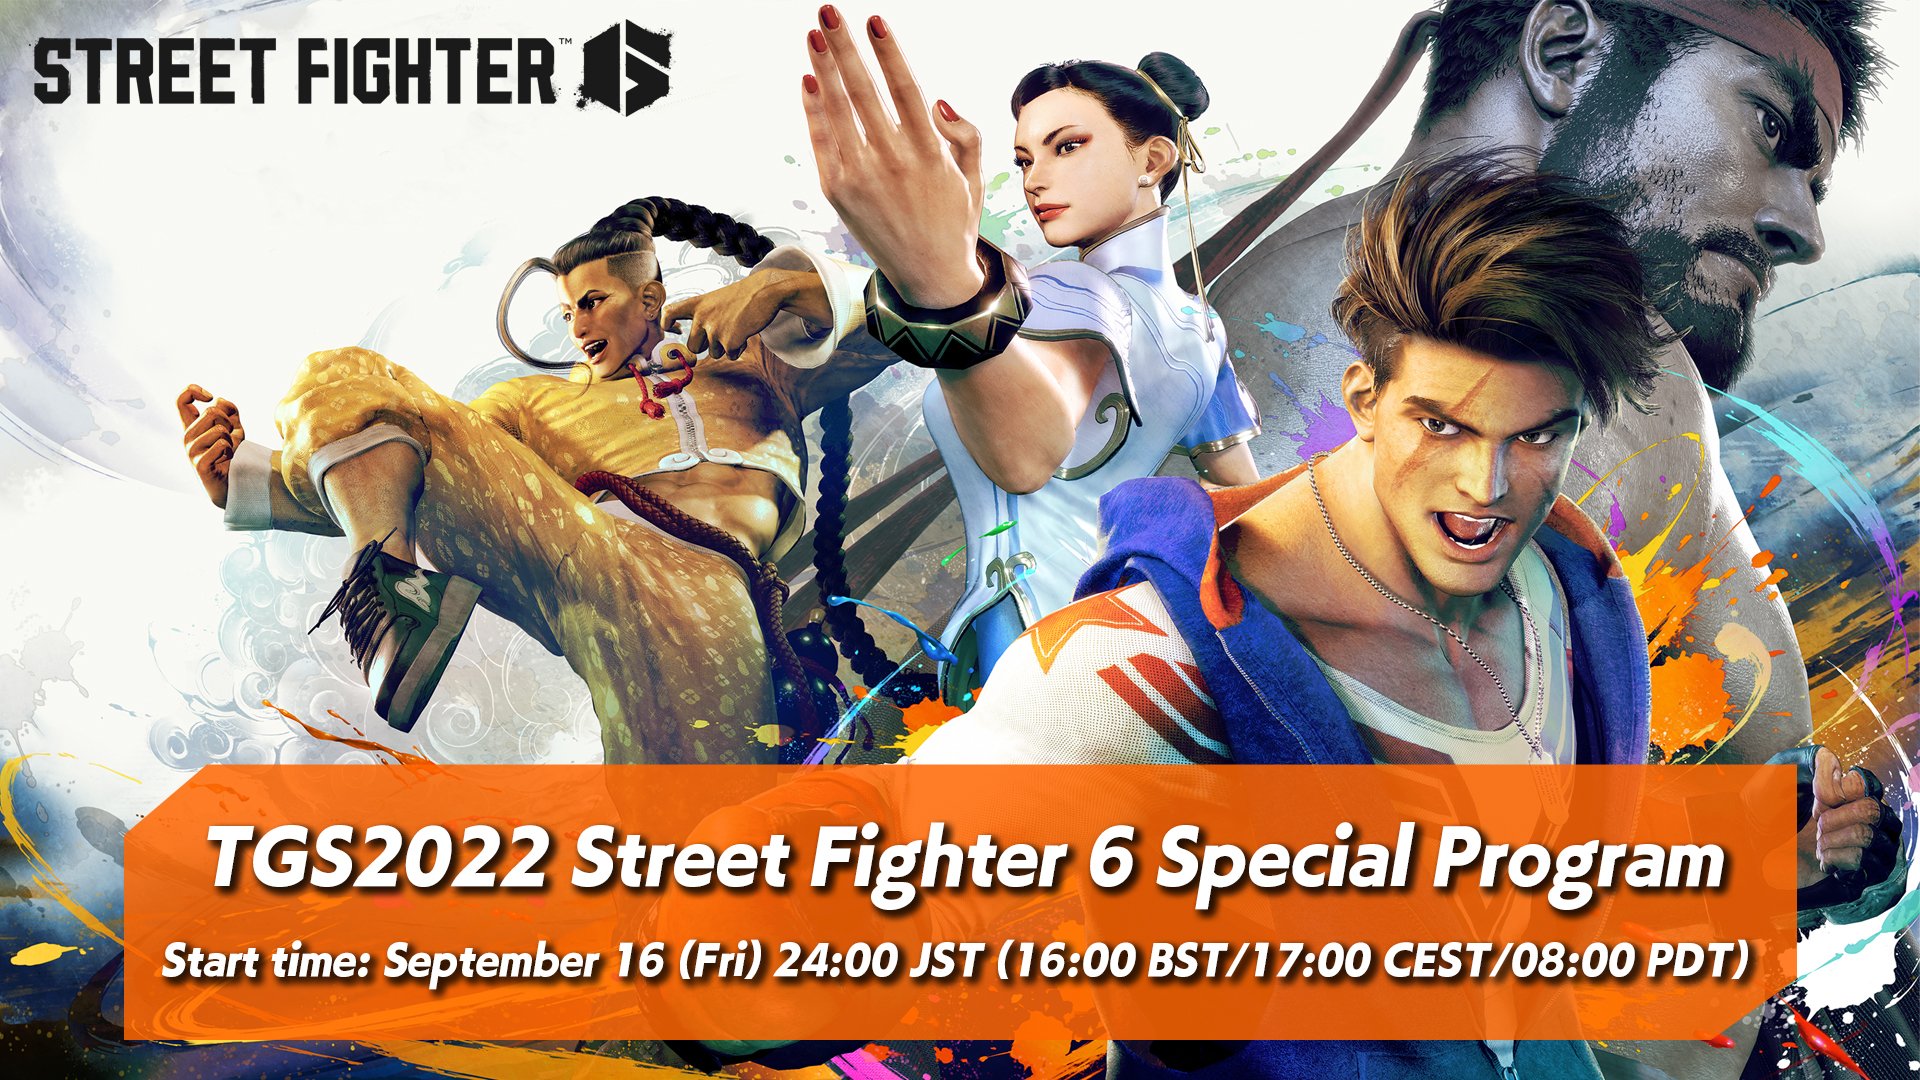 Street Fighter 6 release date, open beta times, and more